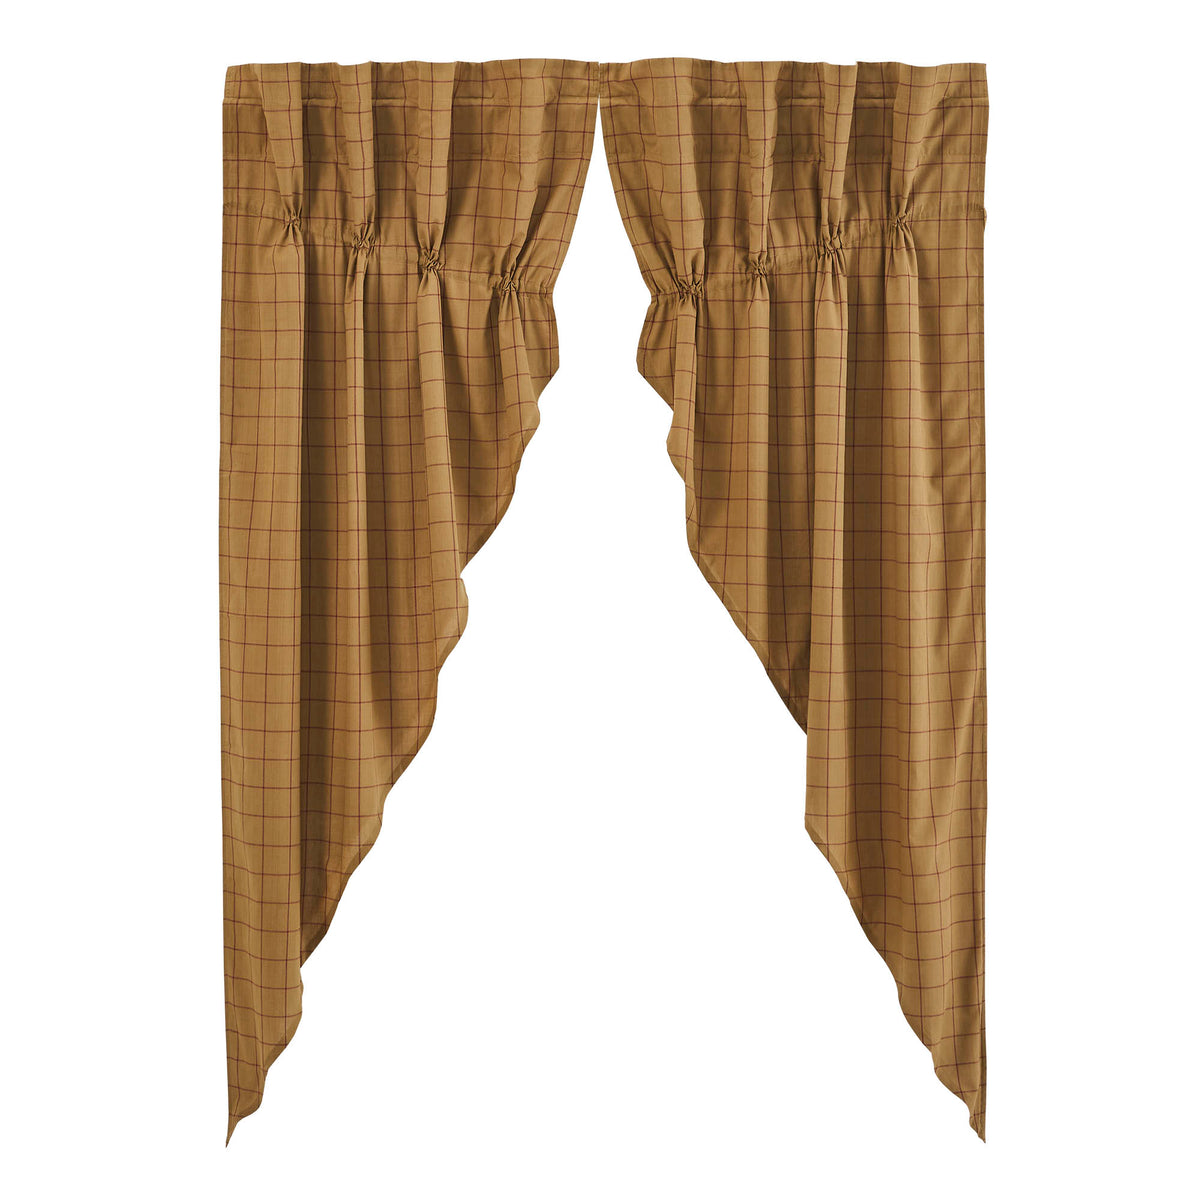 Connell Prairie Short Panel Set of 2 63x36x18